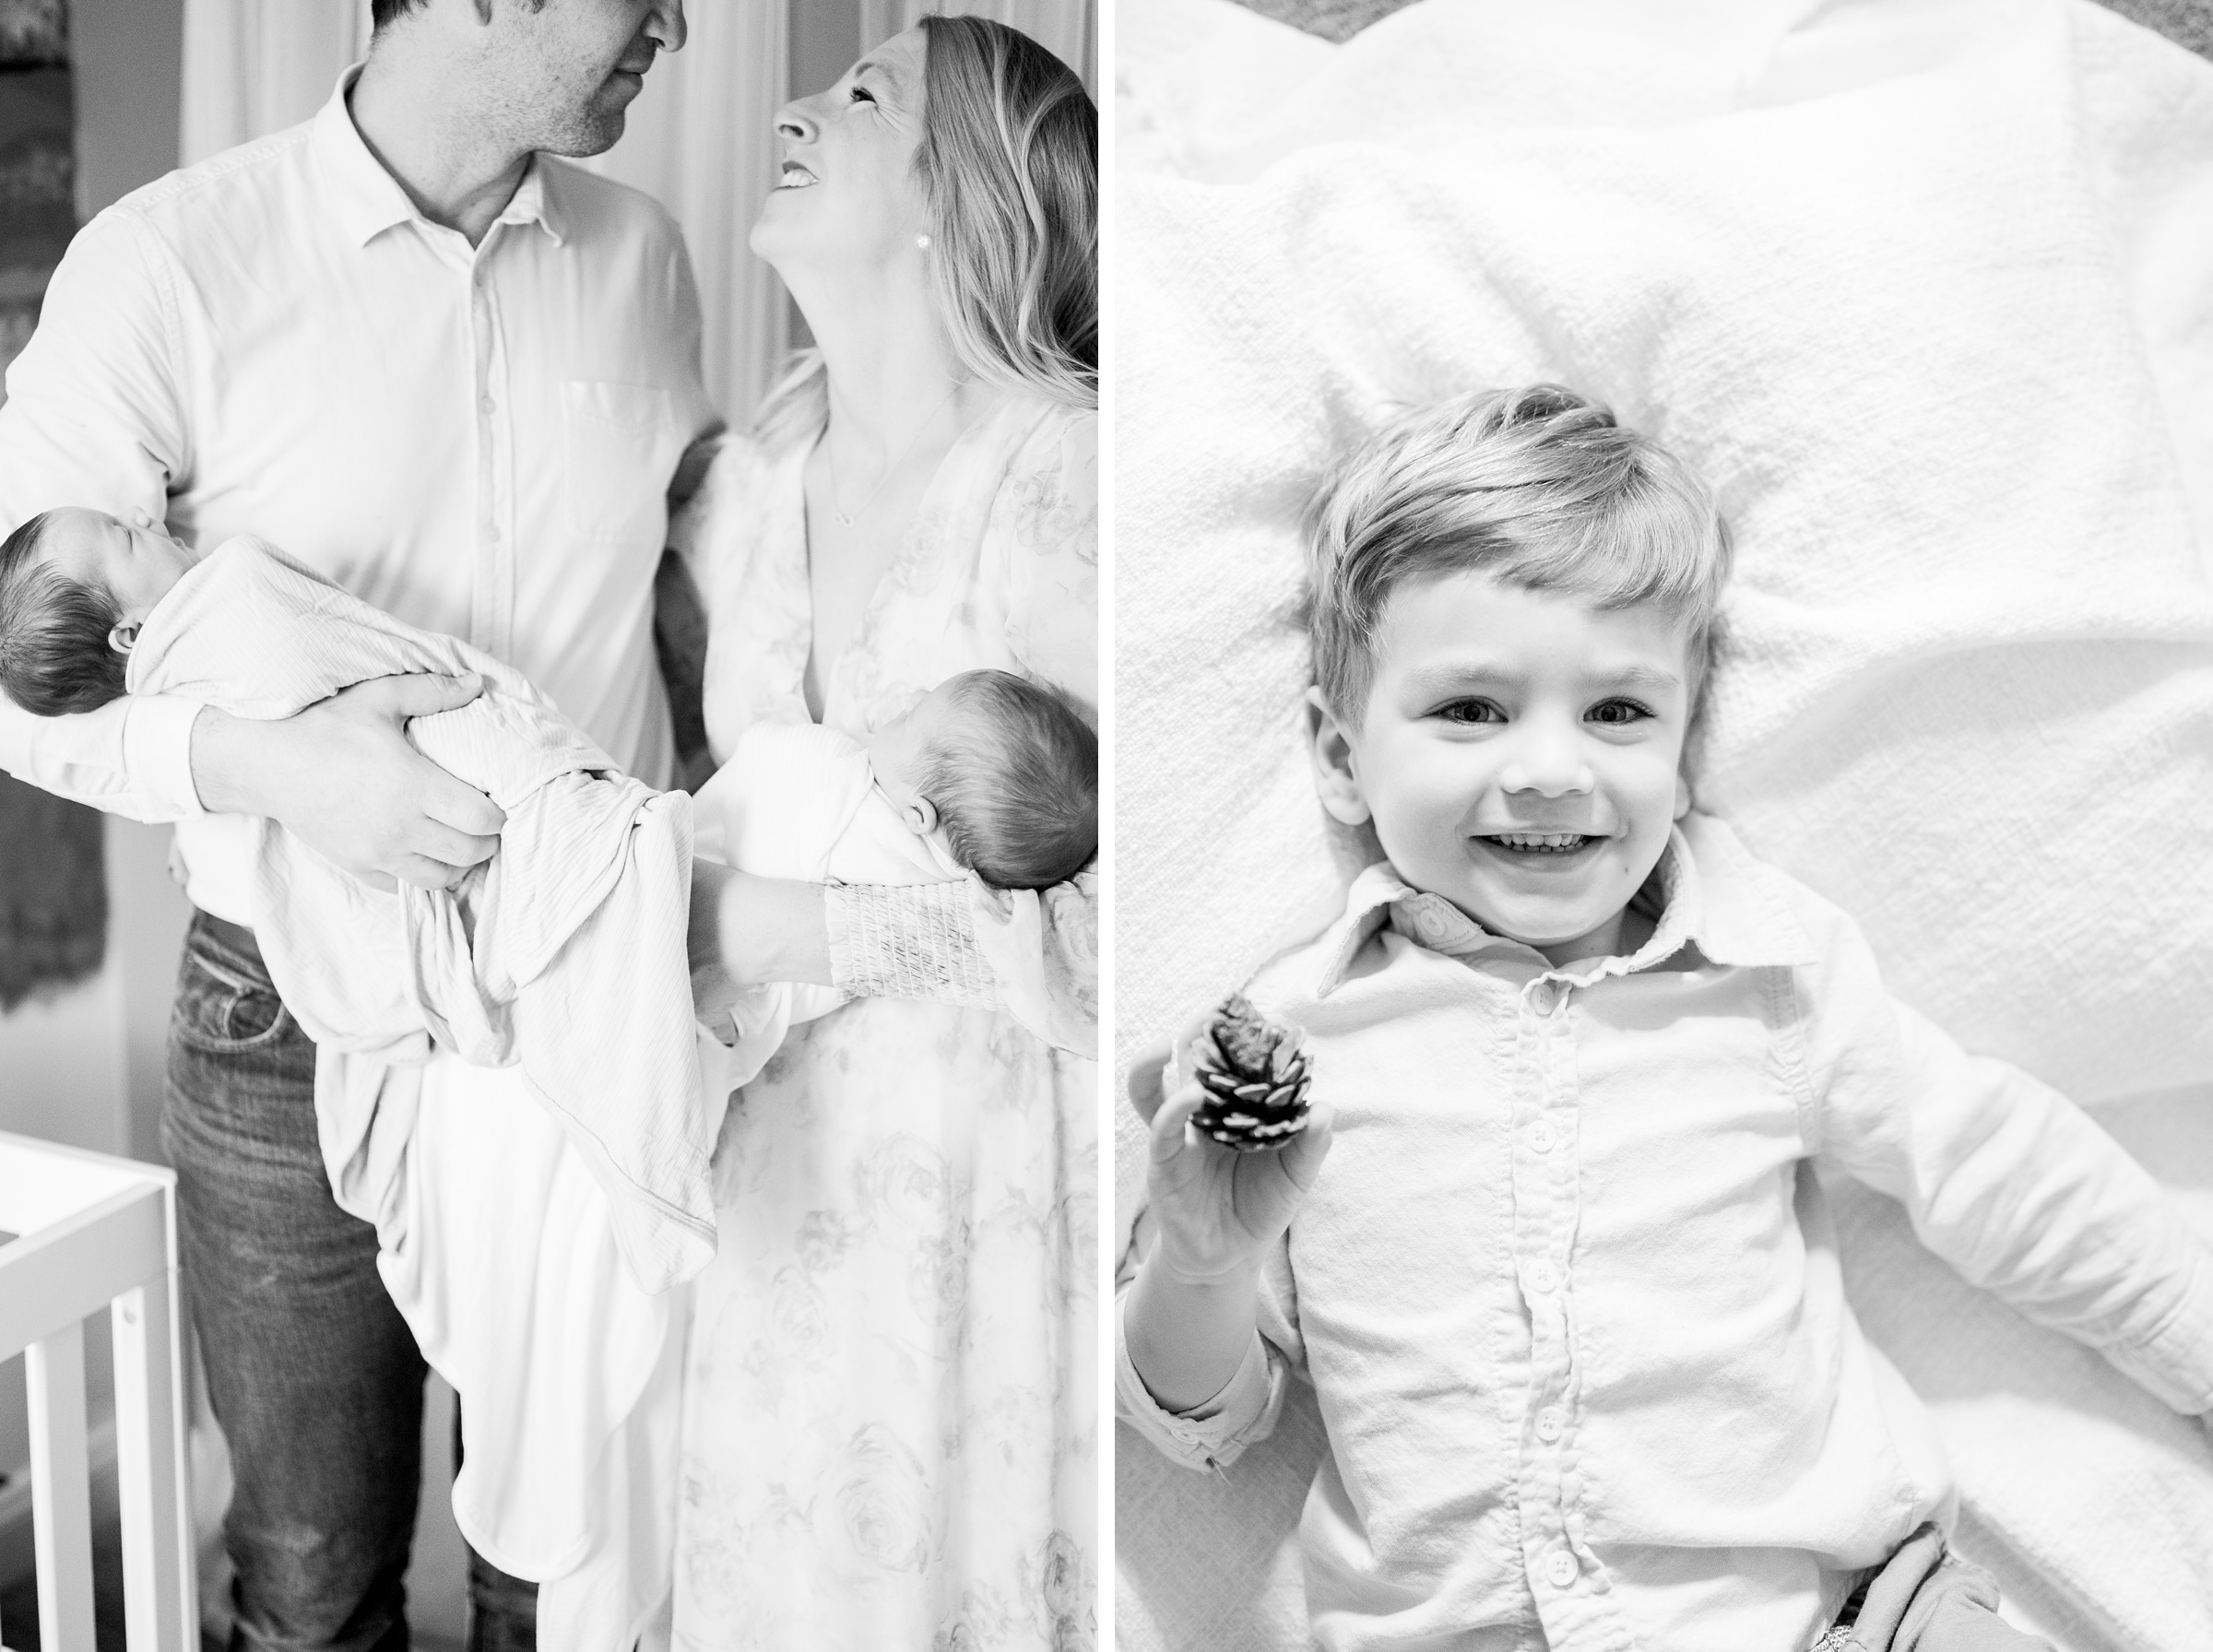 In-home newborn photography session photographed by Newborn Photographer in Baltimore, Maryland Cait Kramer.